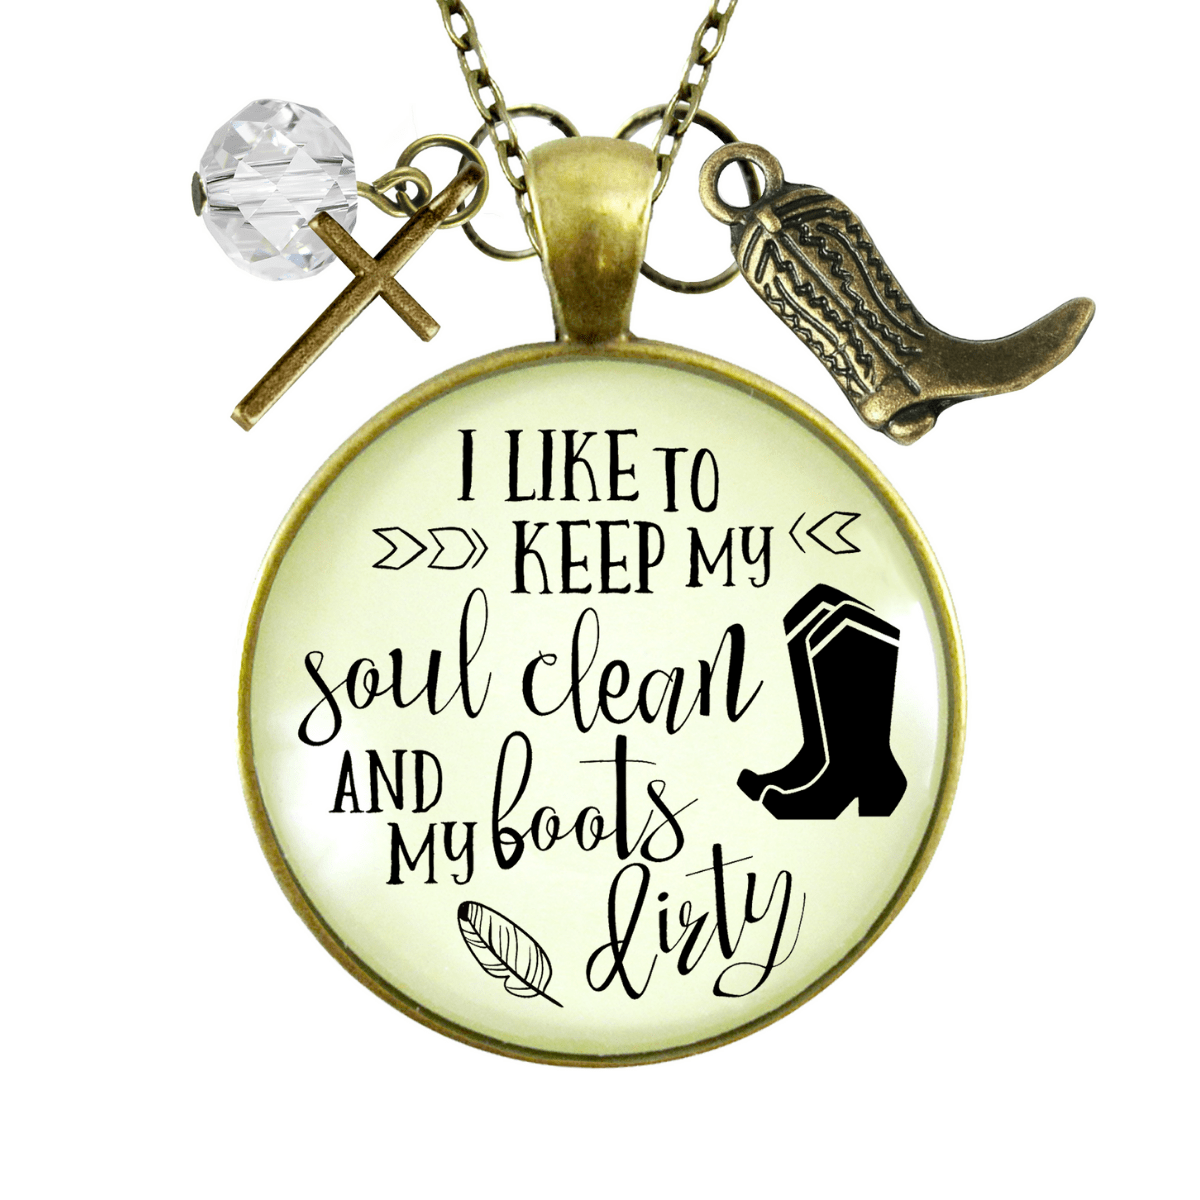 Gutsy Goodness Western Cross Necklace Keep Soul Clean Boots Dirty Southern Jewelry - Gutsy Goodness Handmade Jewelry;Western Cross Necklace Keep Soul Clean Boots Dirty Southern Jewelry - Gutsy Goodness Handmade Jewelry Gifts